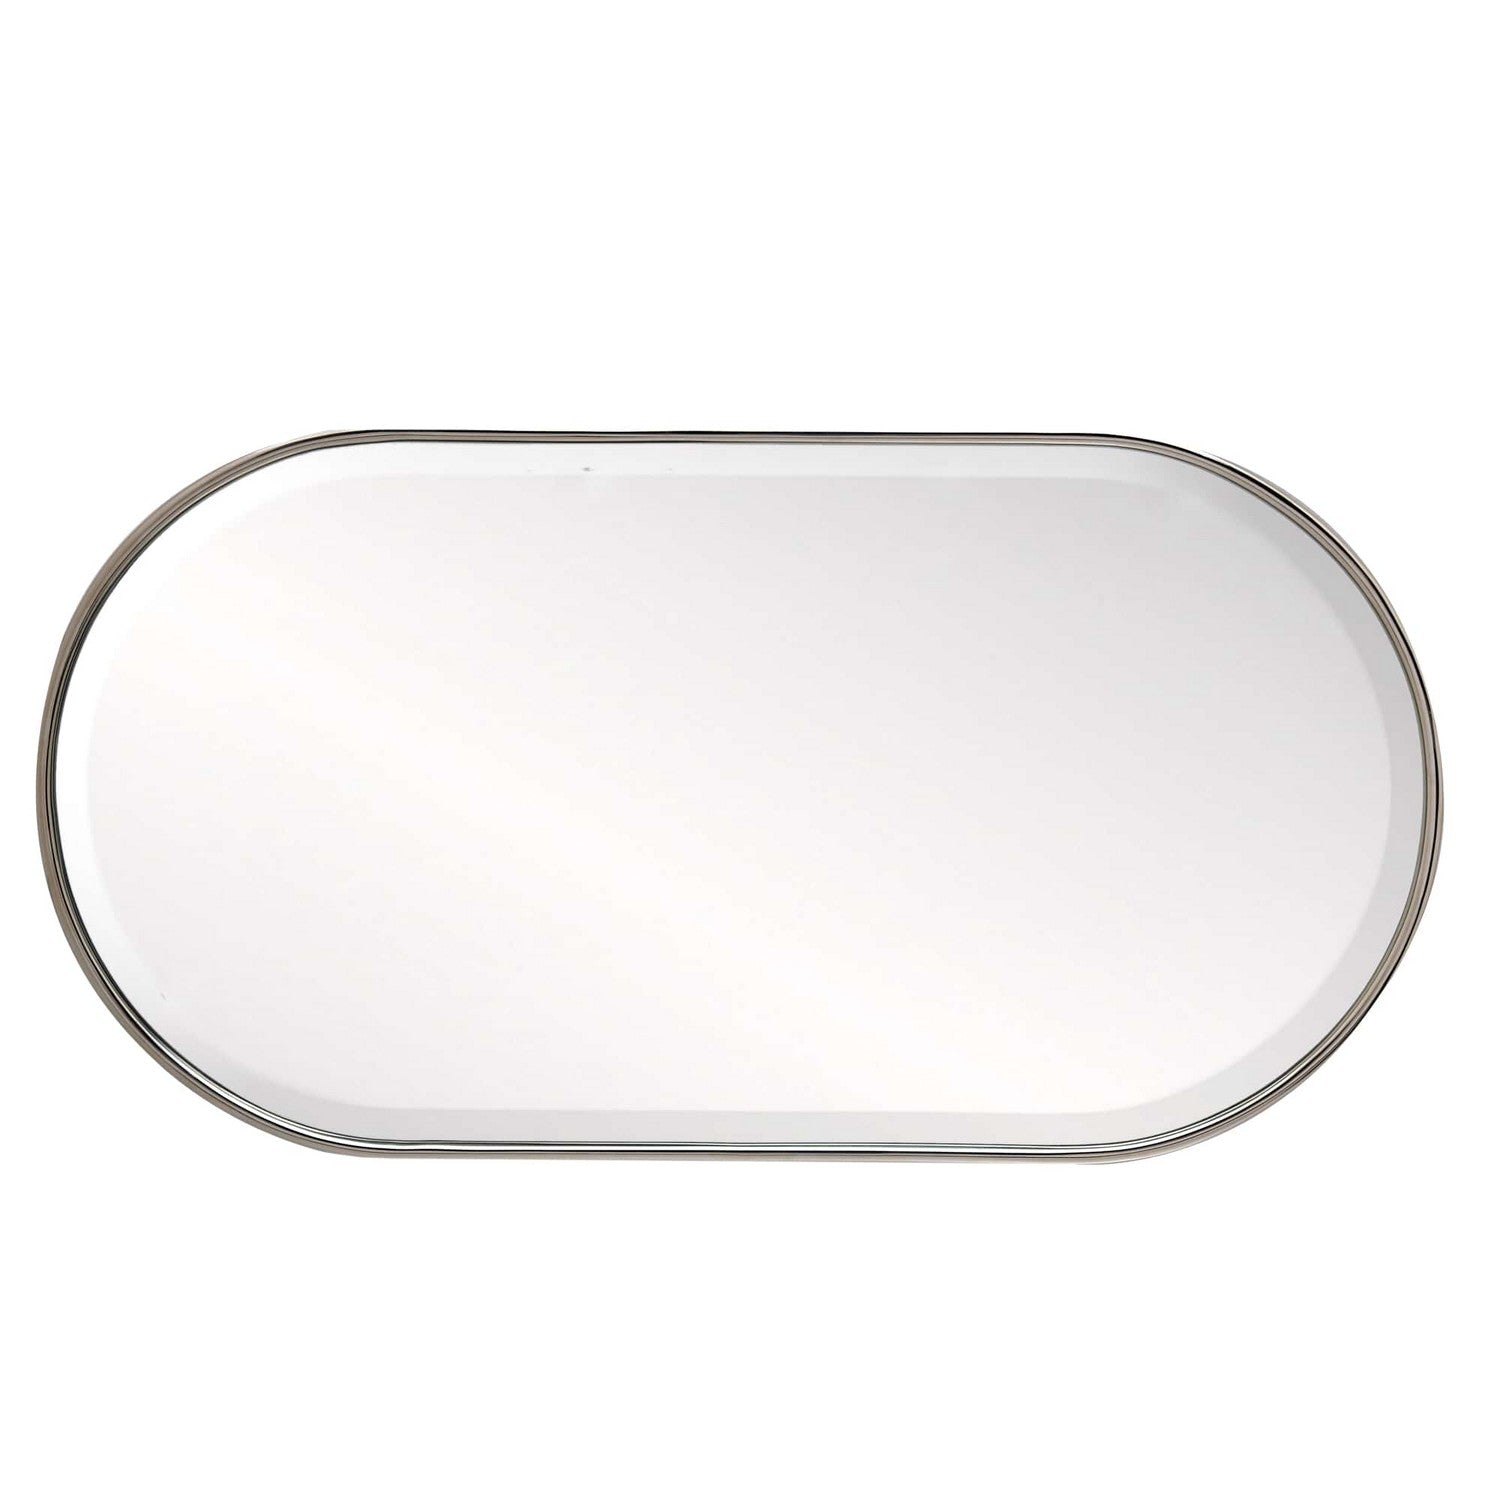 Mirror from the Vaquero collection in Polished Nickel finish